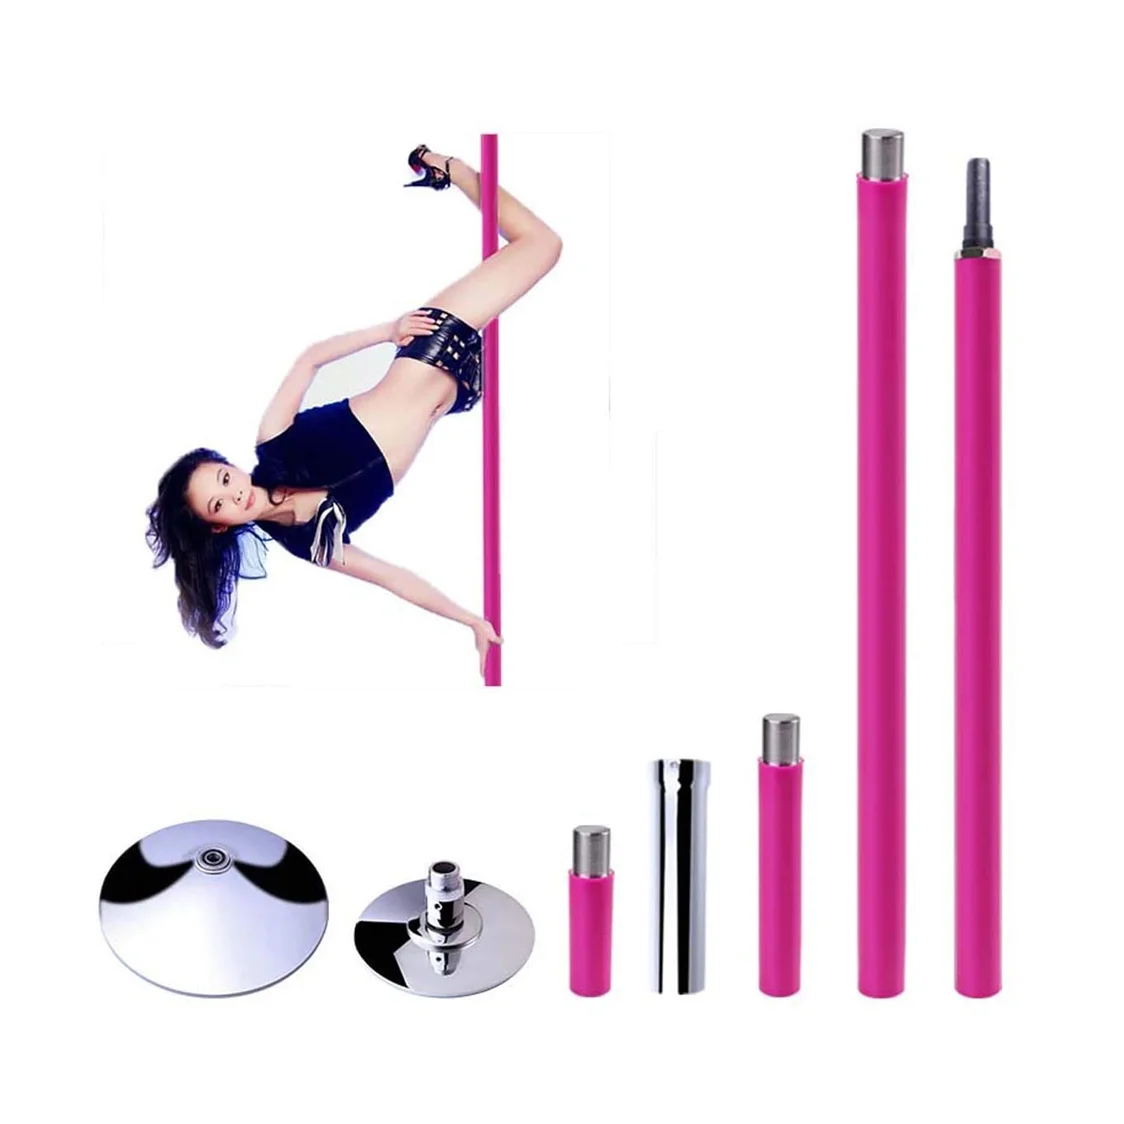 Buy Pink Silicone Dance Pole at Best Prices